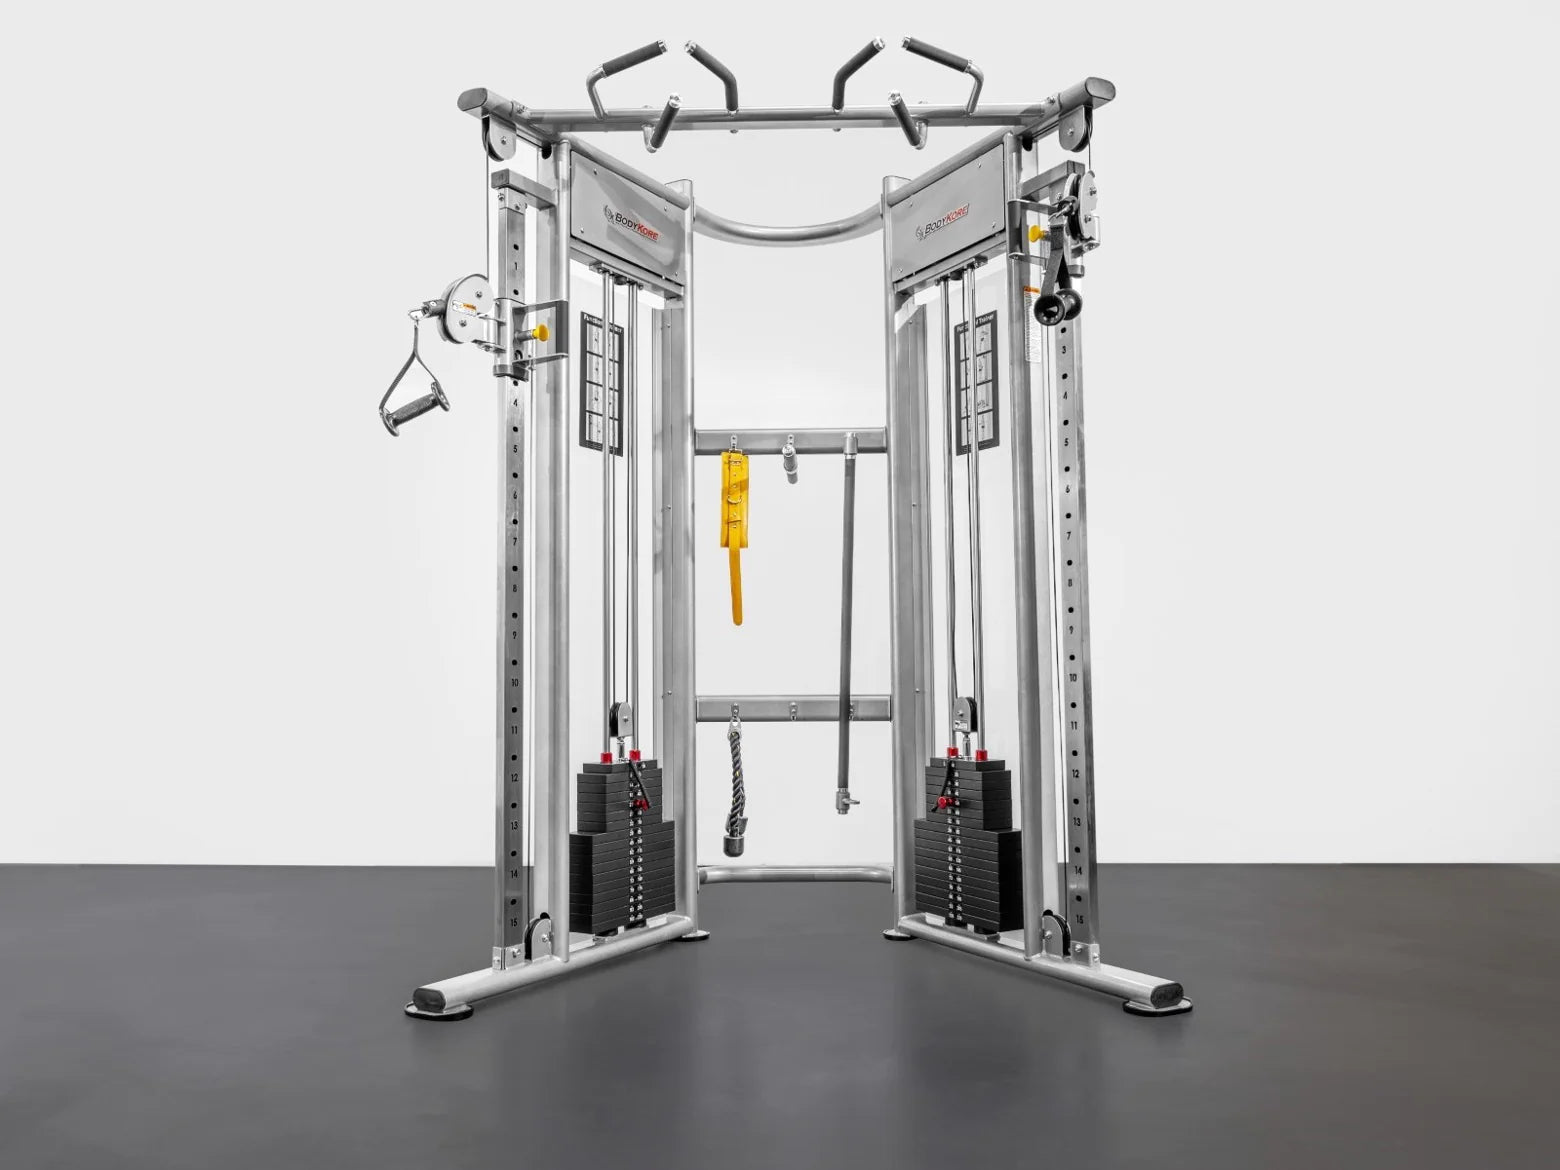 Home Gym Package BODYKORE